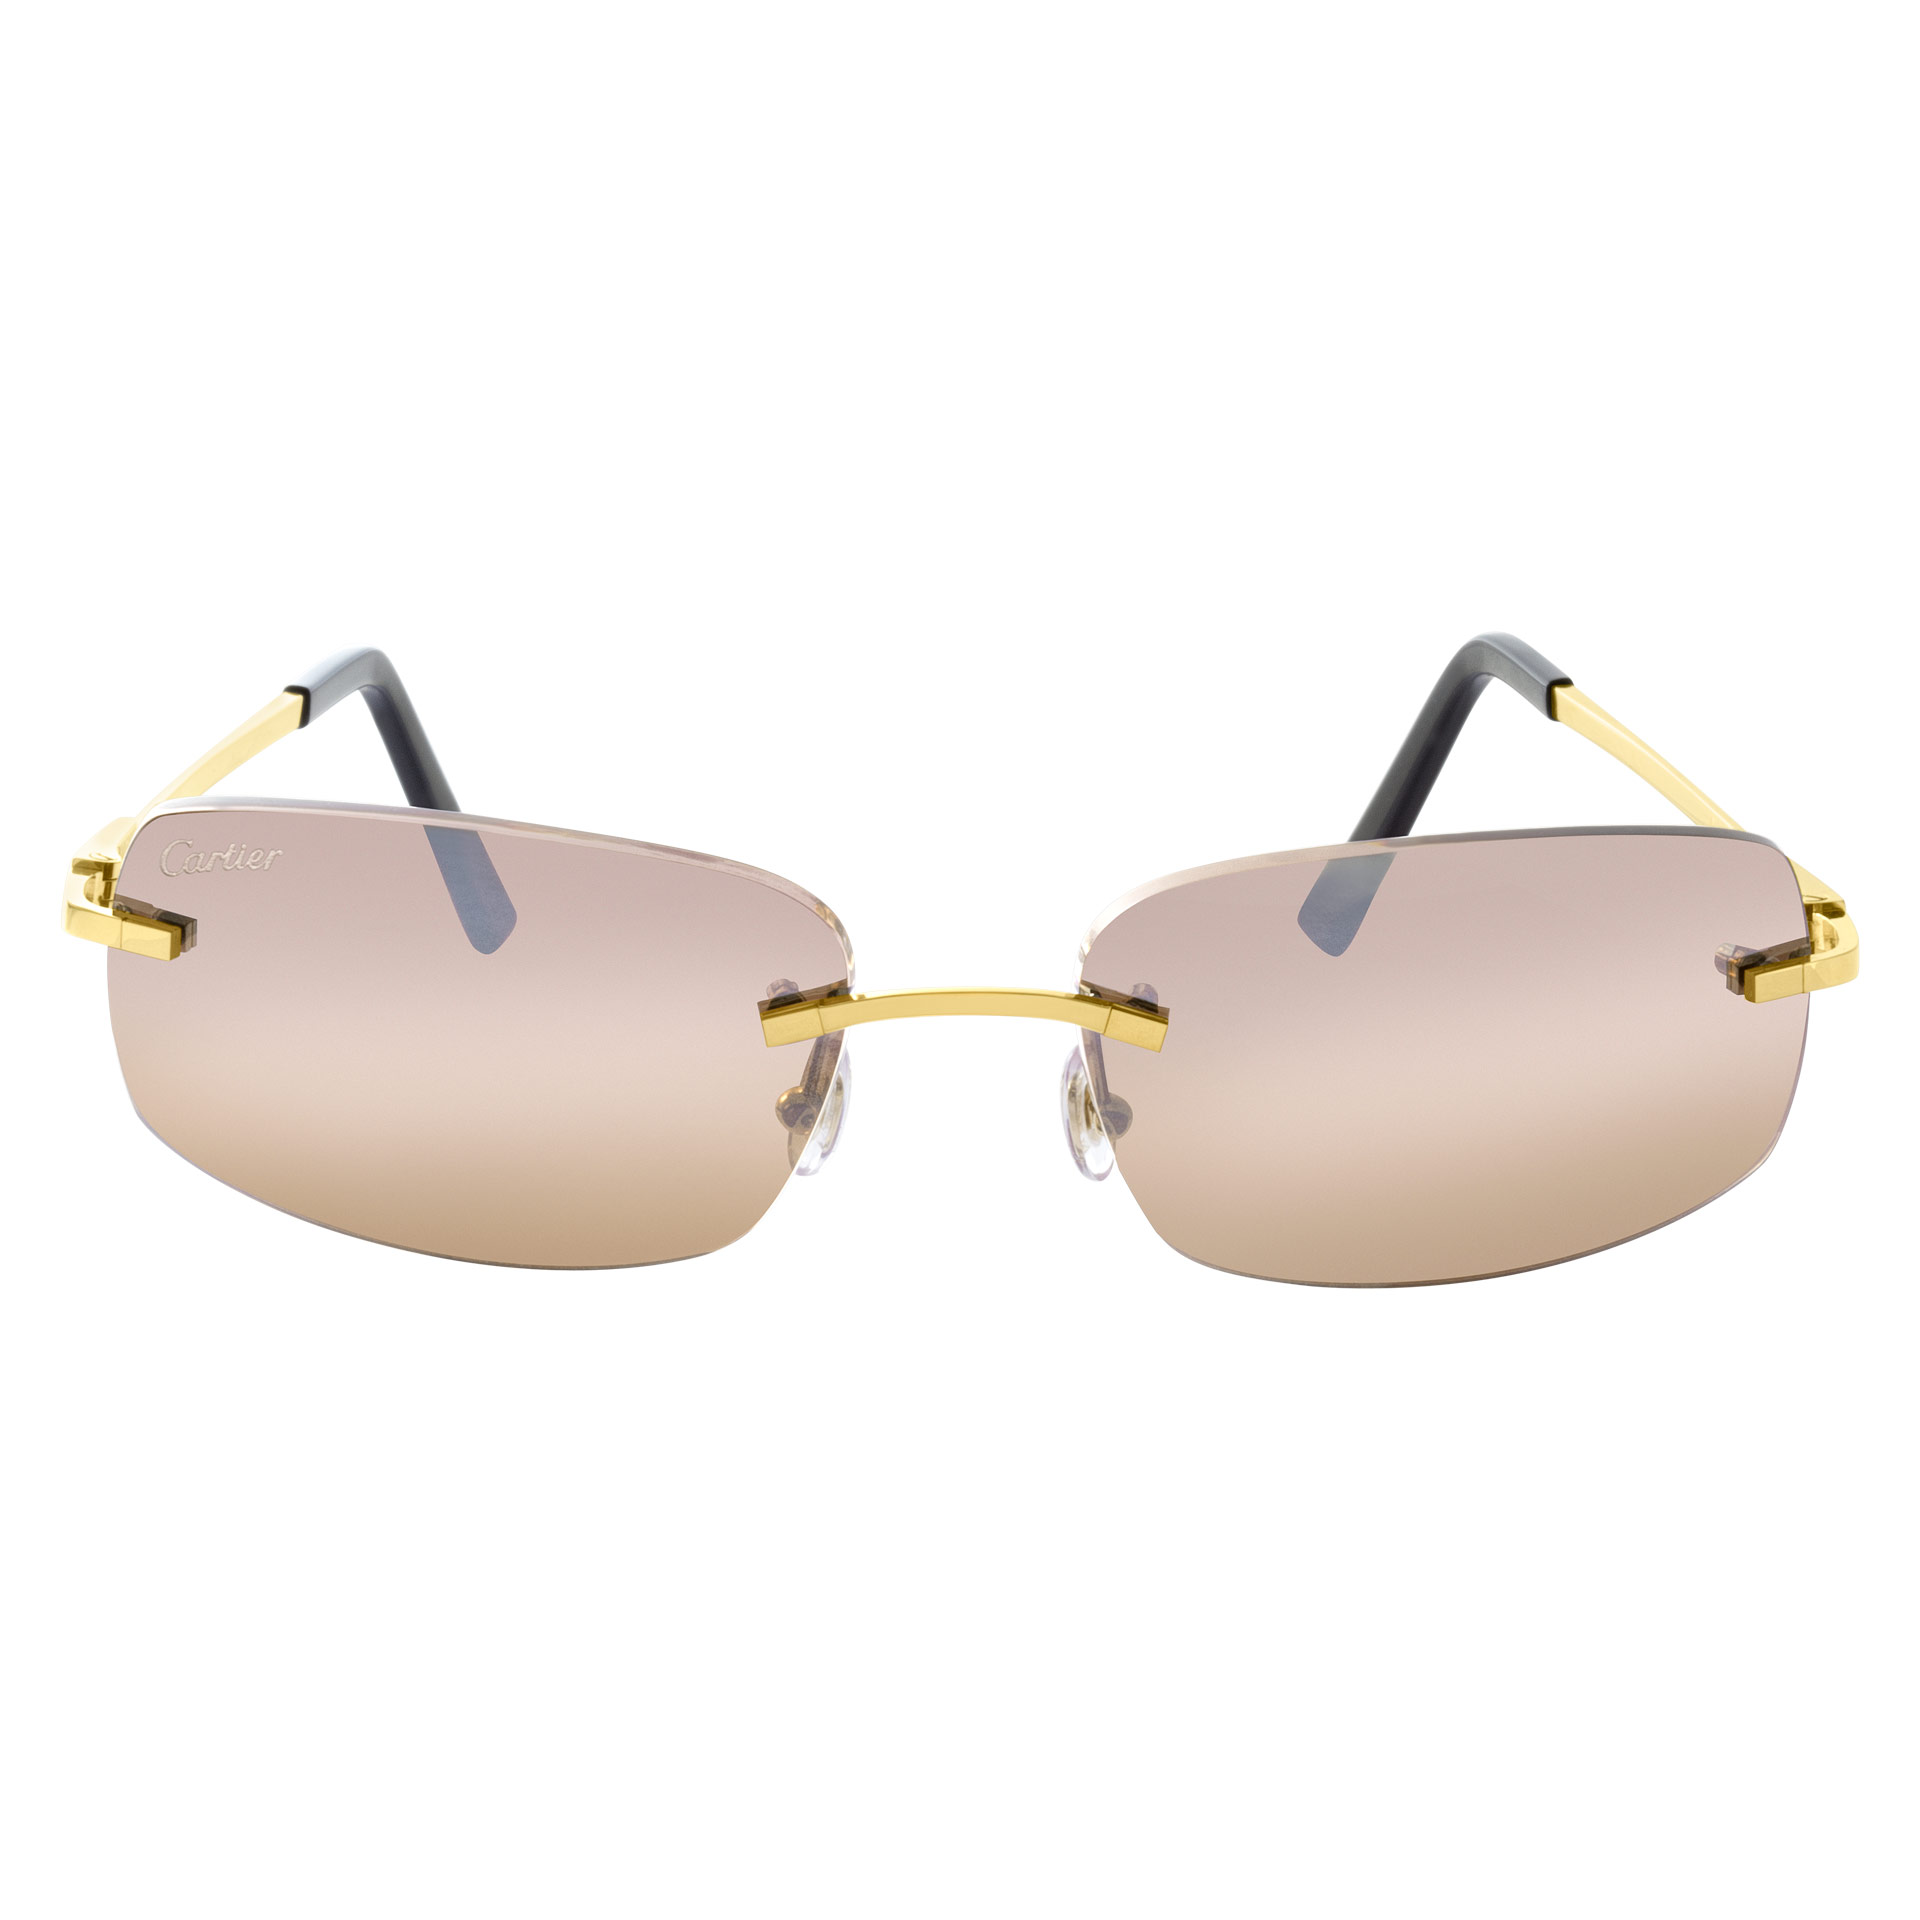 Cartier glasses in 18k gold plated frame with diamond accent at the temple